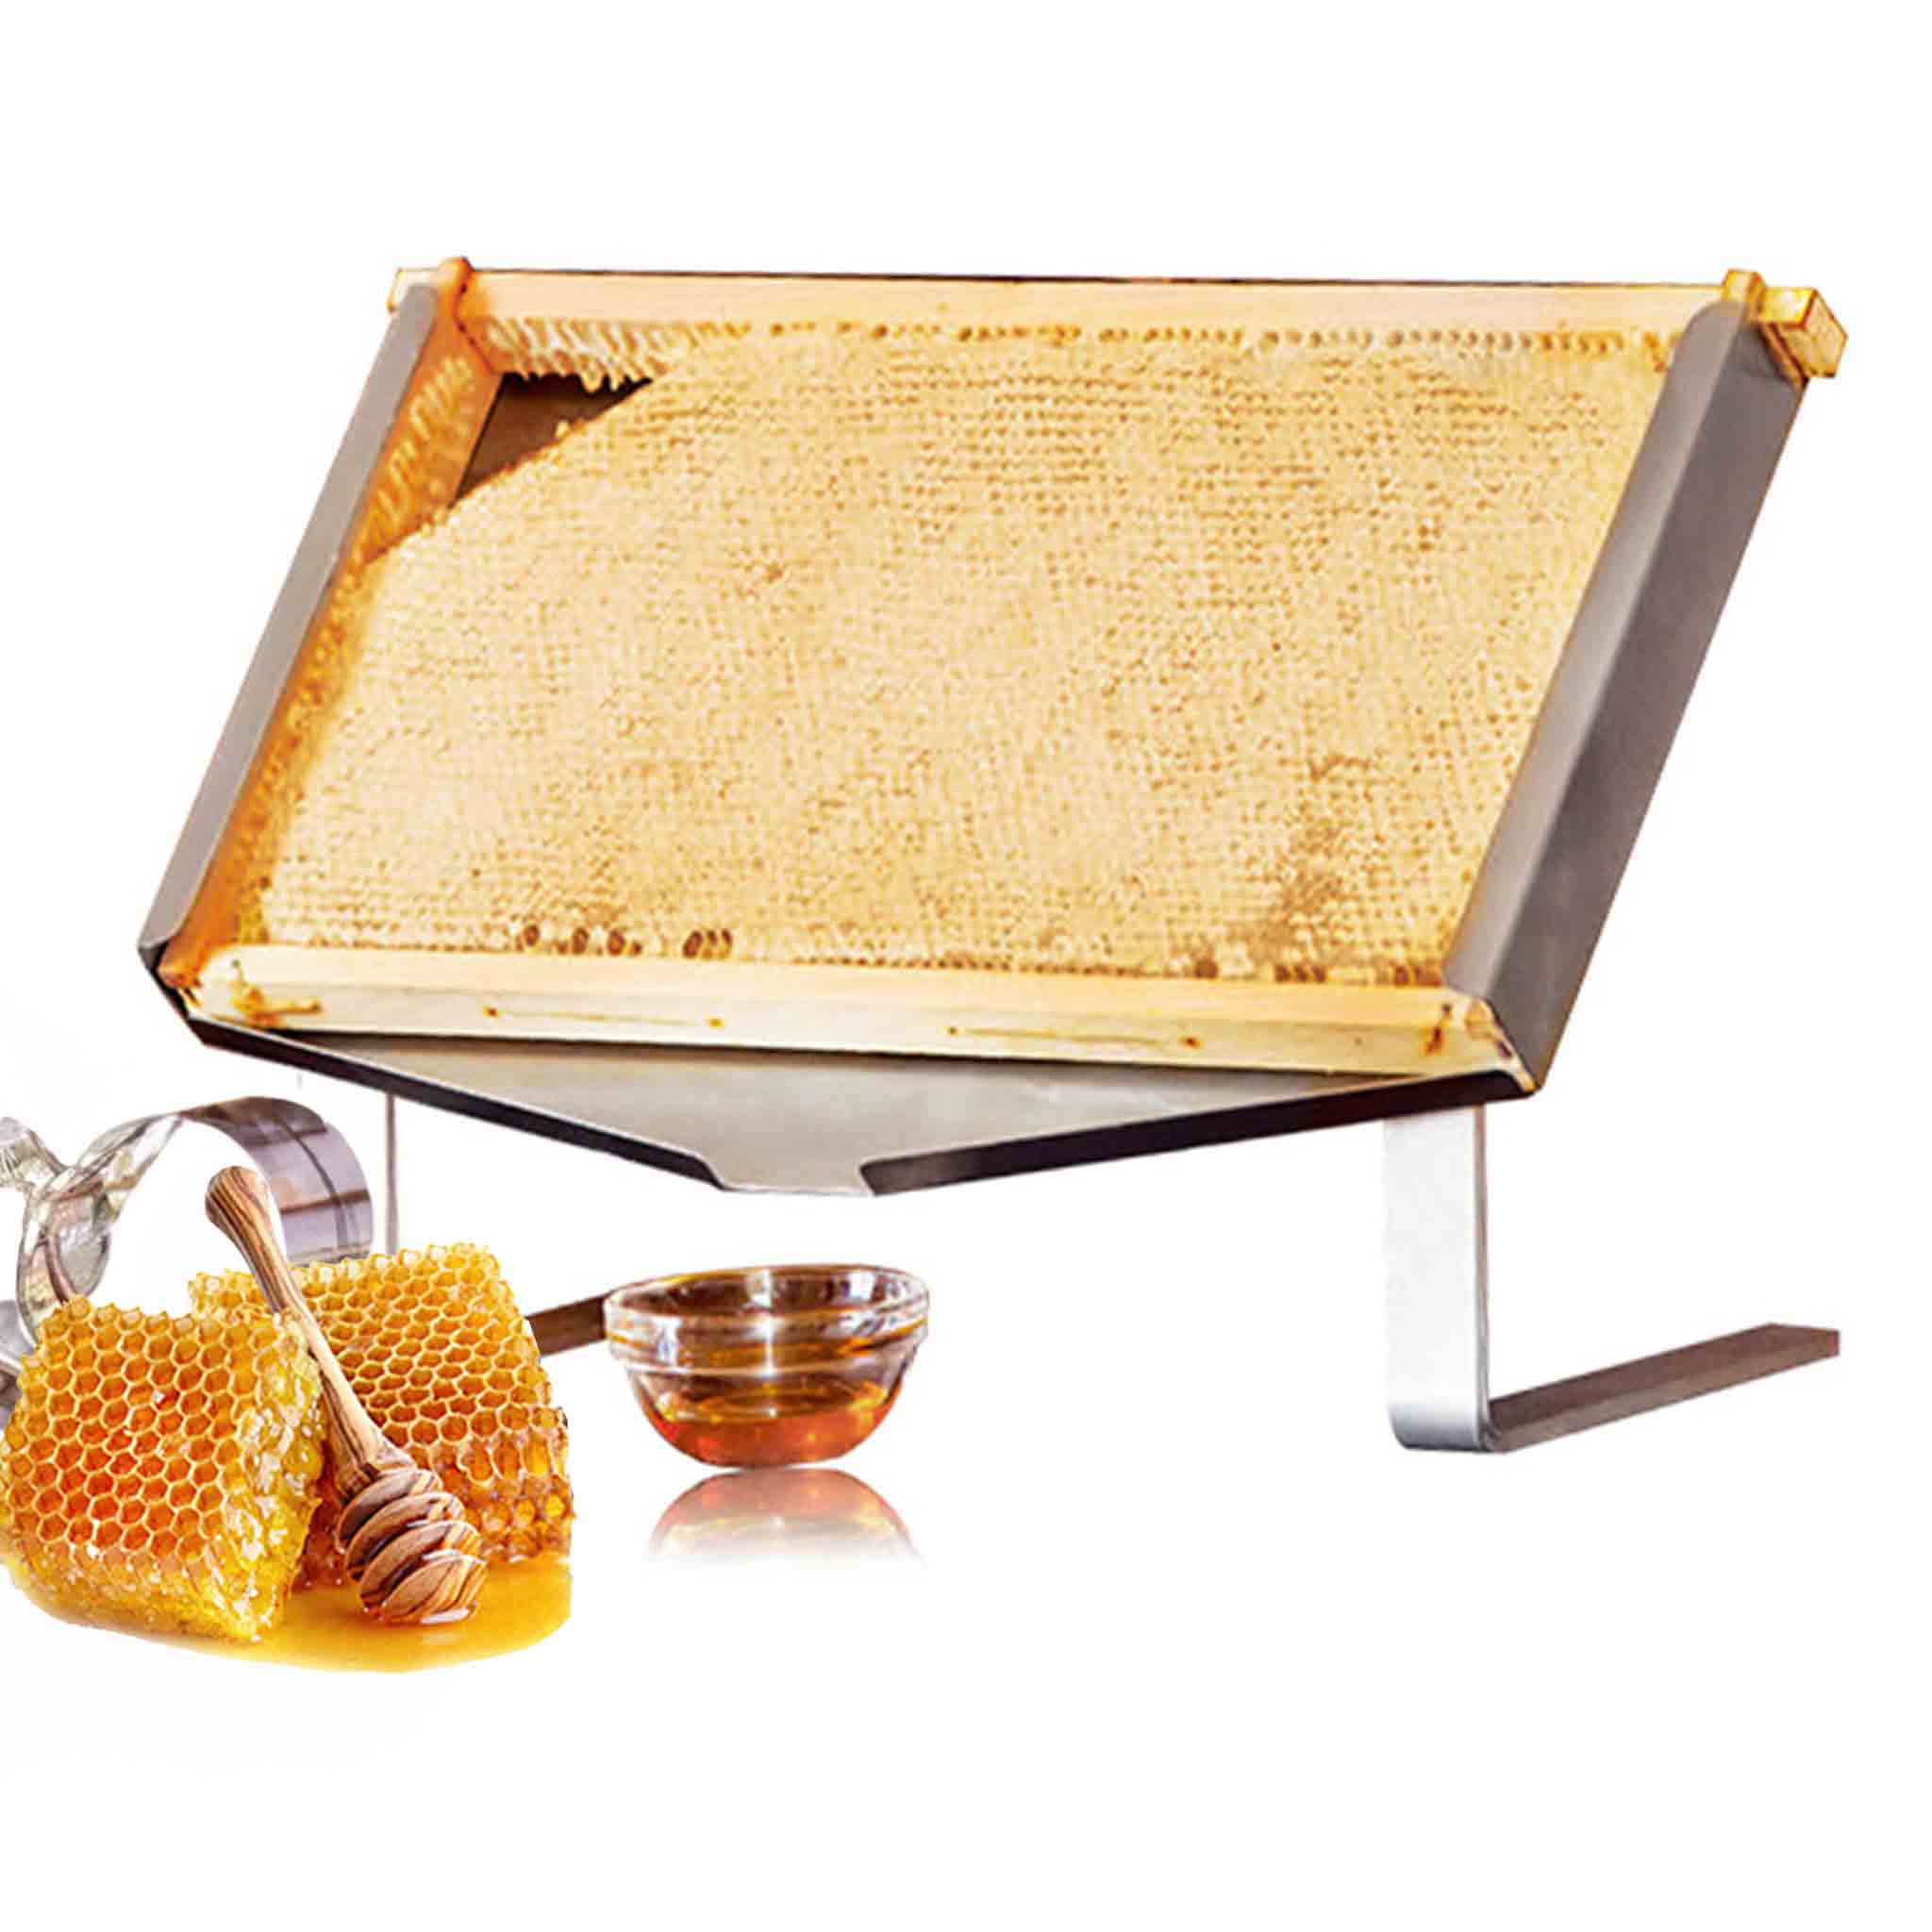 Stainless Steel Honey Comb Display Stand for Restaurants and Cafe's - Display collection by Buzzbee Beekeeping Supplies